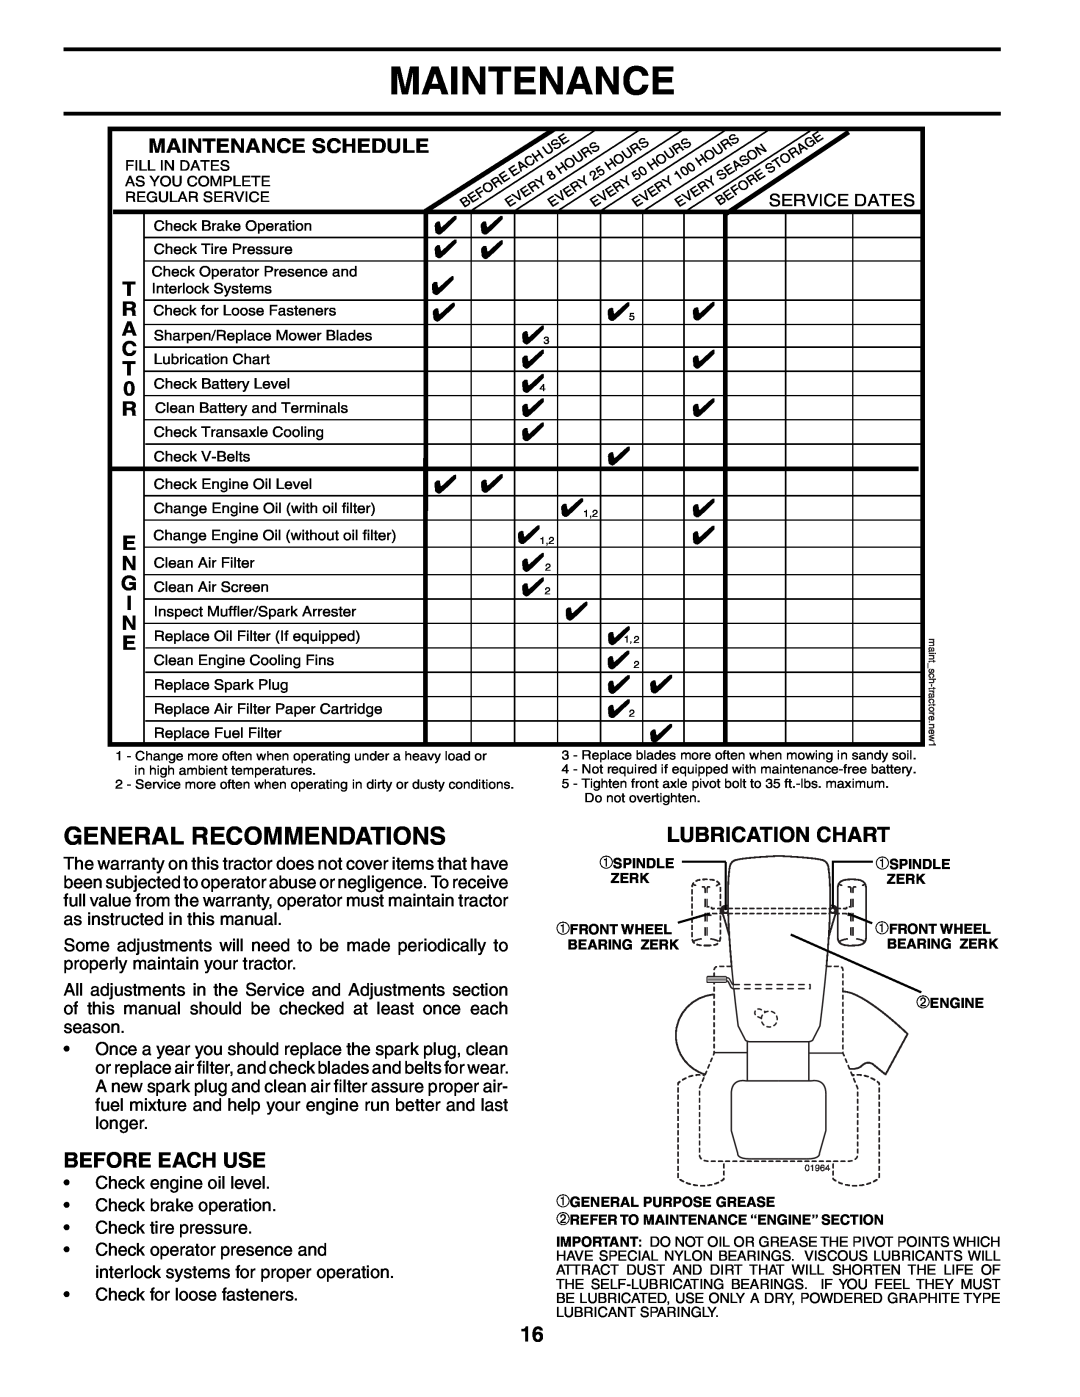 Poulan PD18H42STB owner manual General Recommendations, Lubrication Chart, Before Each Use, Maintenance Schedule 